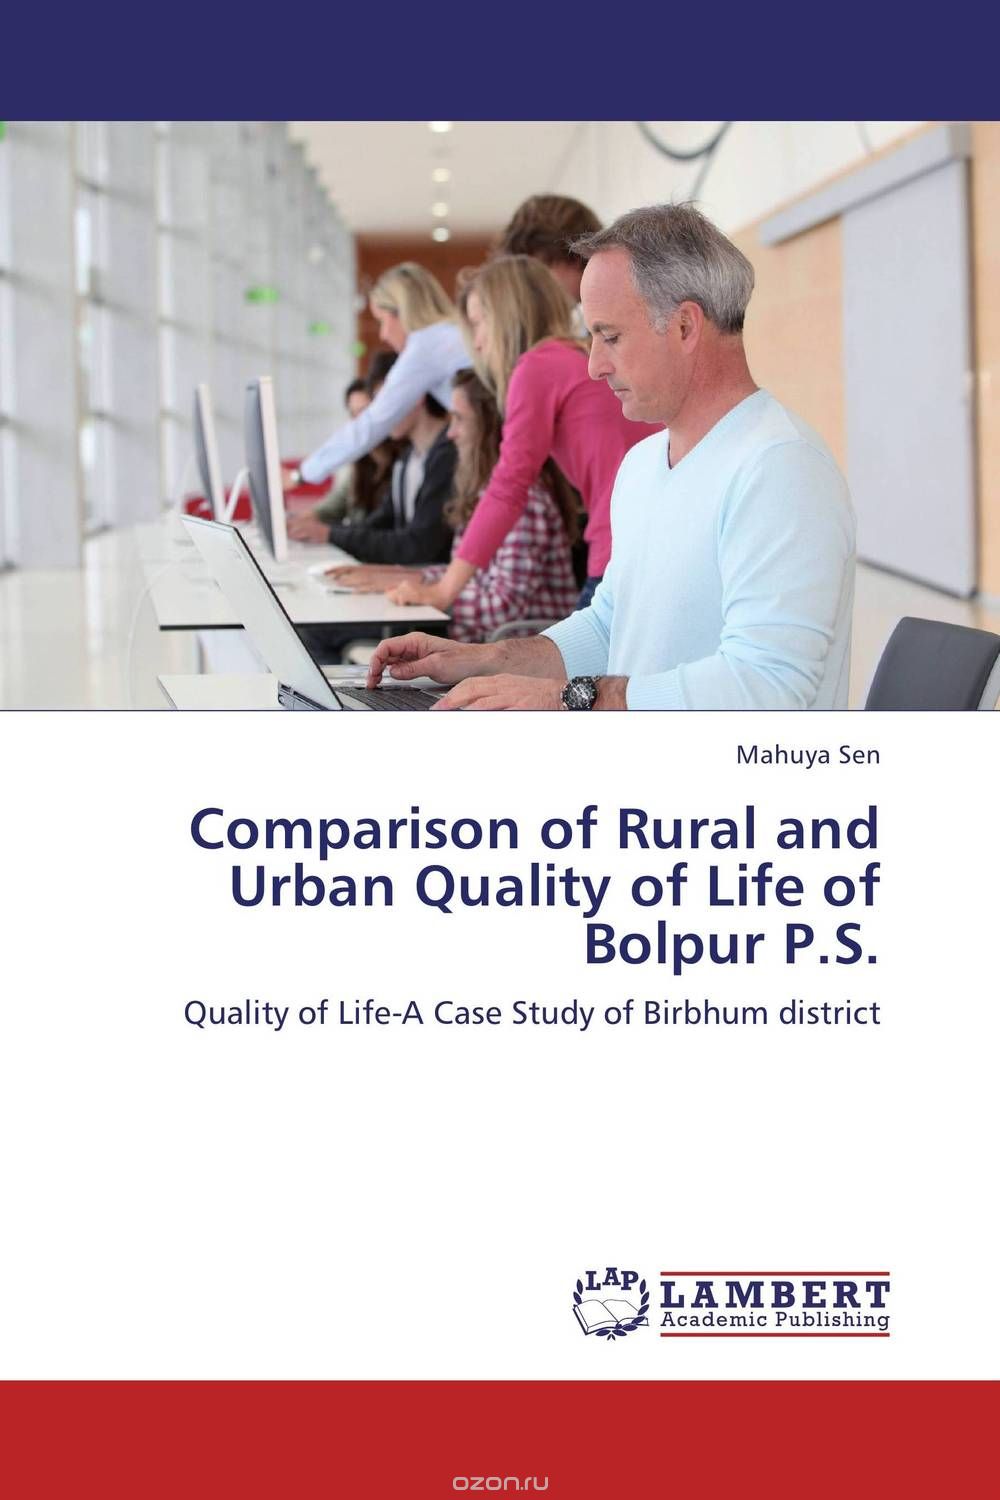 Comparison of Rural and Urban Quality of Life of Bolpur P.S.